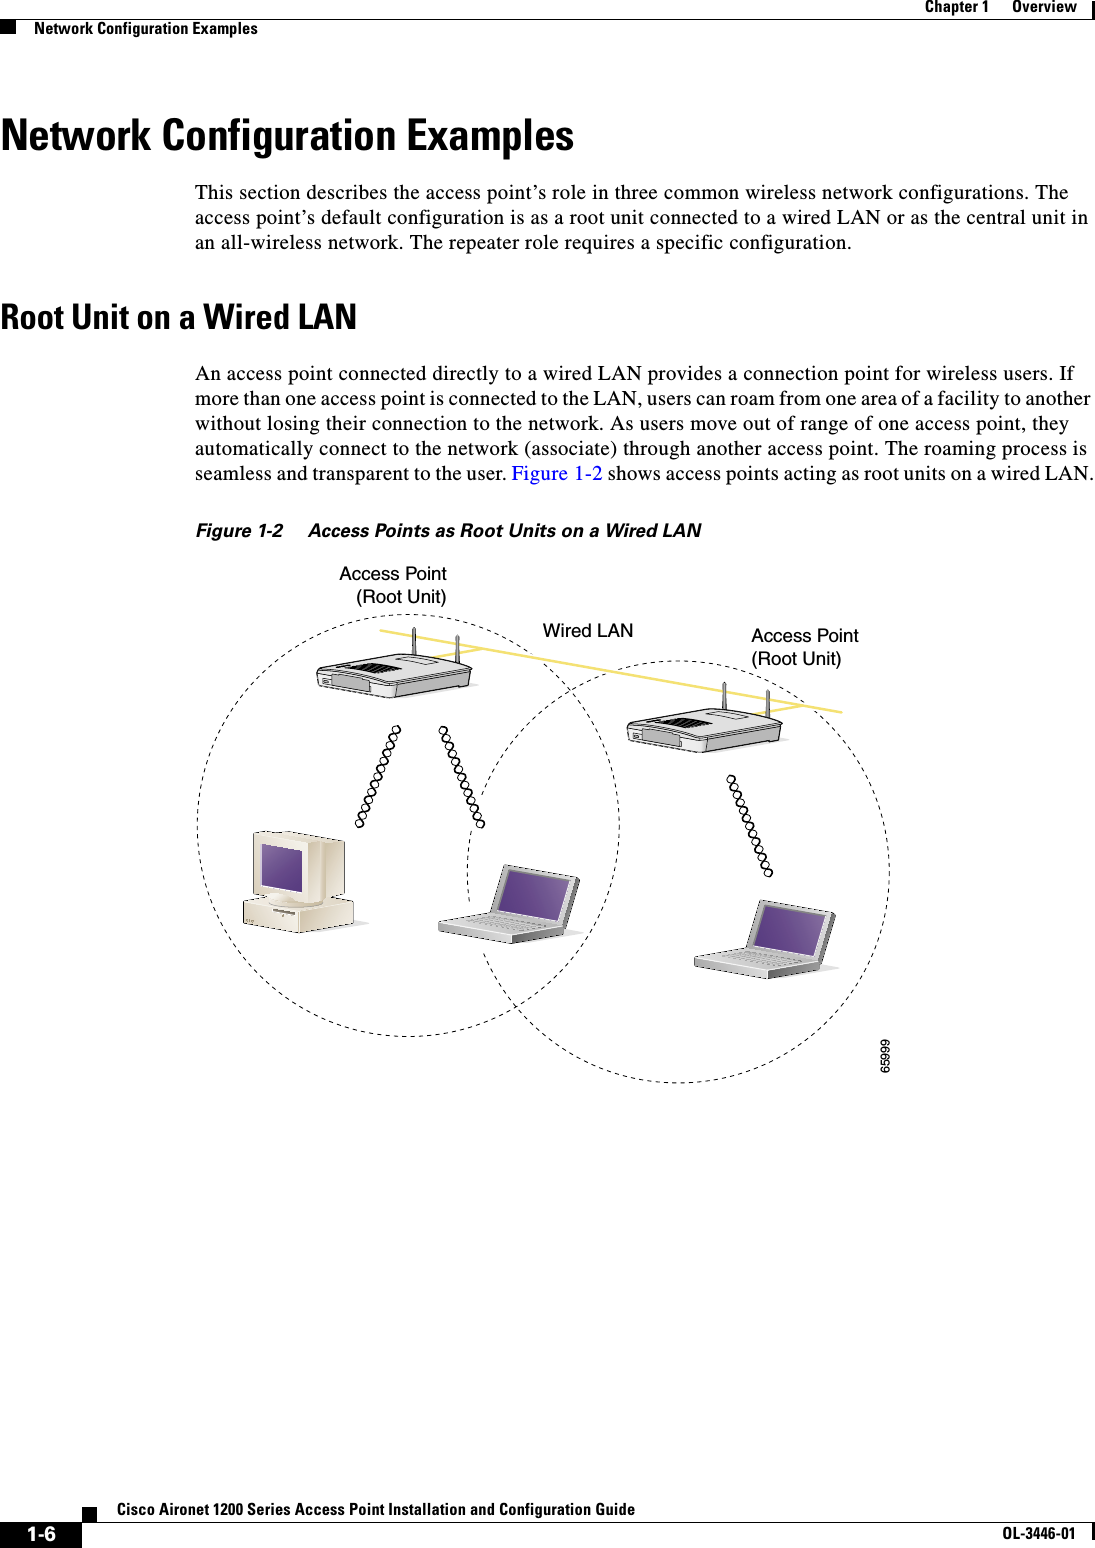 1-6Cisco Aironet 1200 Series Access Point Installation and Configuration GuideOL-3446-01Chapter 1      OverviewNetwork Configuration ExamplesNetwork Configuration ExamplesThis section describes the access point’s role in three common wireless network configurations. The access point’s default configuration is as a root unit connected to a wired LAN or as the central unit in an all-wireless network. The repeater role requires a specific configuration.Root Unit on a Wired LANAn access point connected directly to a wired LAN provides a connection point for wireless users. If more than one access point is connected to the LAN, users can roam from one area of a facility to another without losing their connection to the network. As users move out of range of one access point, they automatically connect to the network (associate) through another access point. The roaming process is seamless and transparent to the user. Figure 1-2 shows access points acting as root units on a wired LAN.Figure 1-2 Access Points as Root Units on a Wired LANAccess Point(Root Unit)Access Point(Root Unit)65999Wired LAN